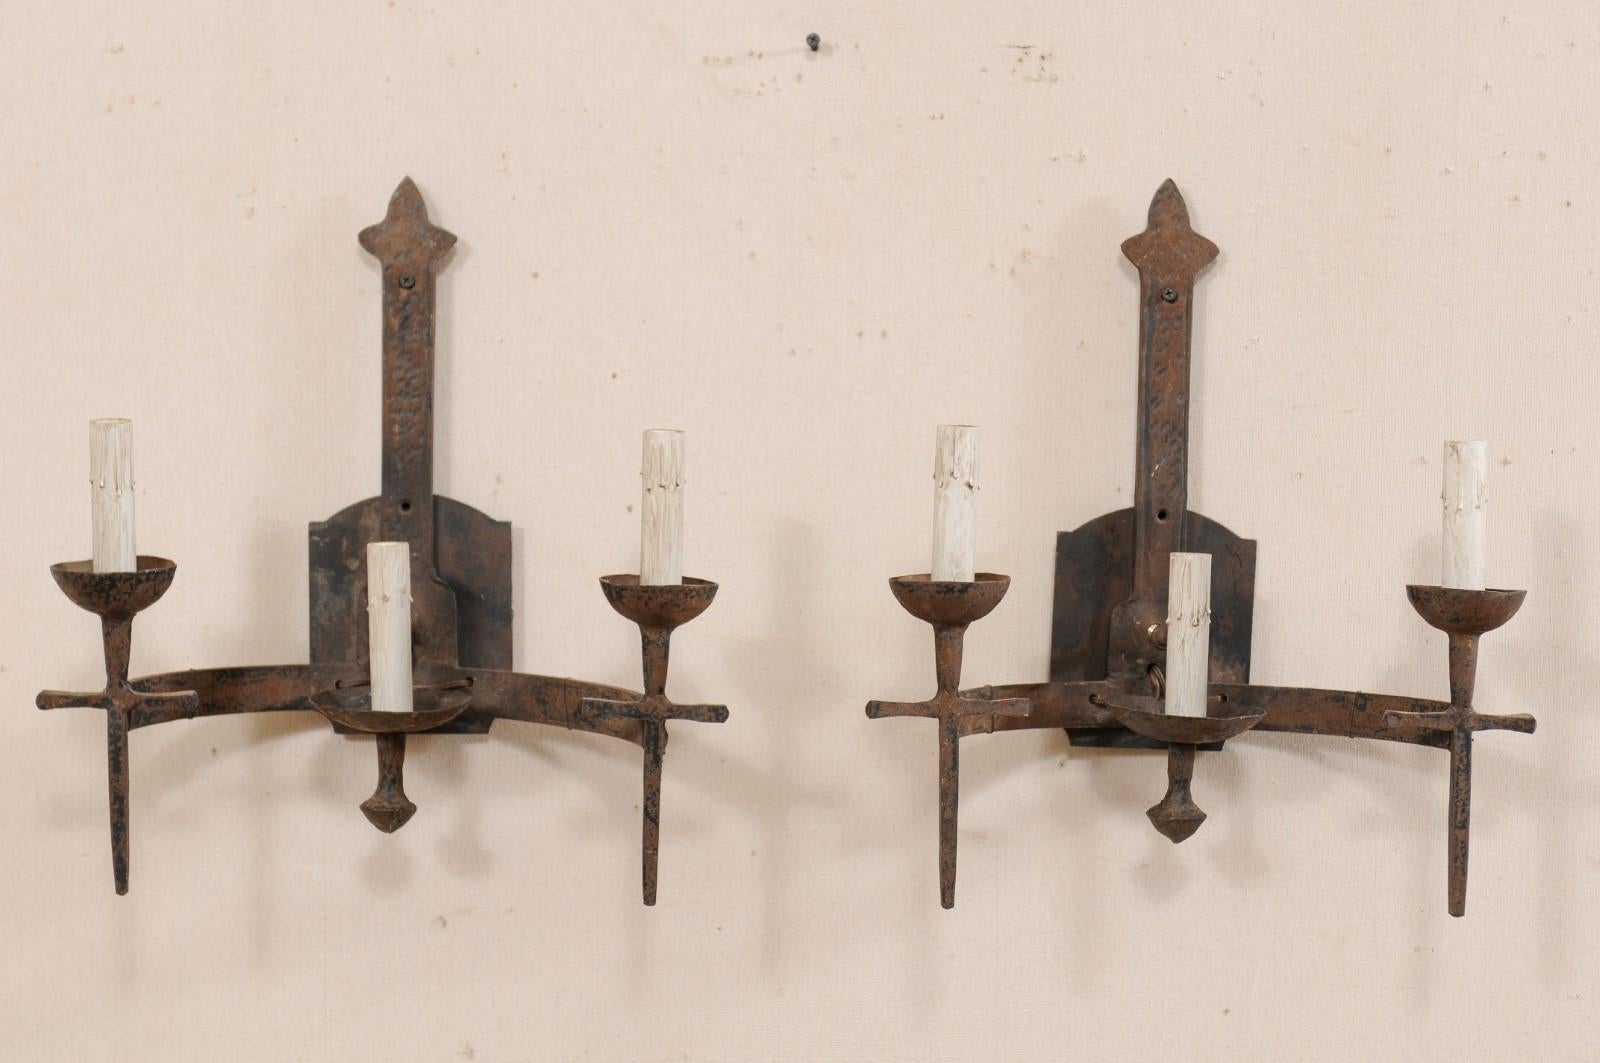 A pair of French three-light iron sconces from the mid-20th century. These vintage French hand forged sconces each have two torch-style lights set at the farthest ends of a horizontally set c-shaped arm, flanking a shorter profiled central light